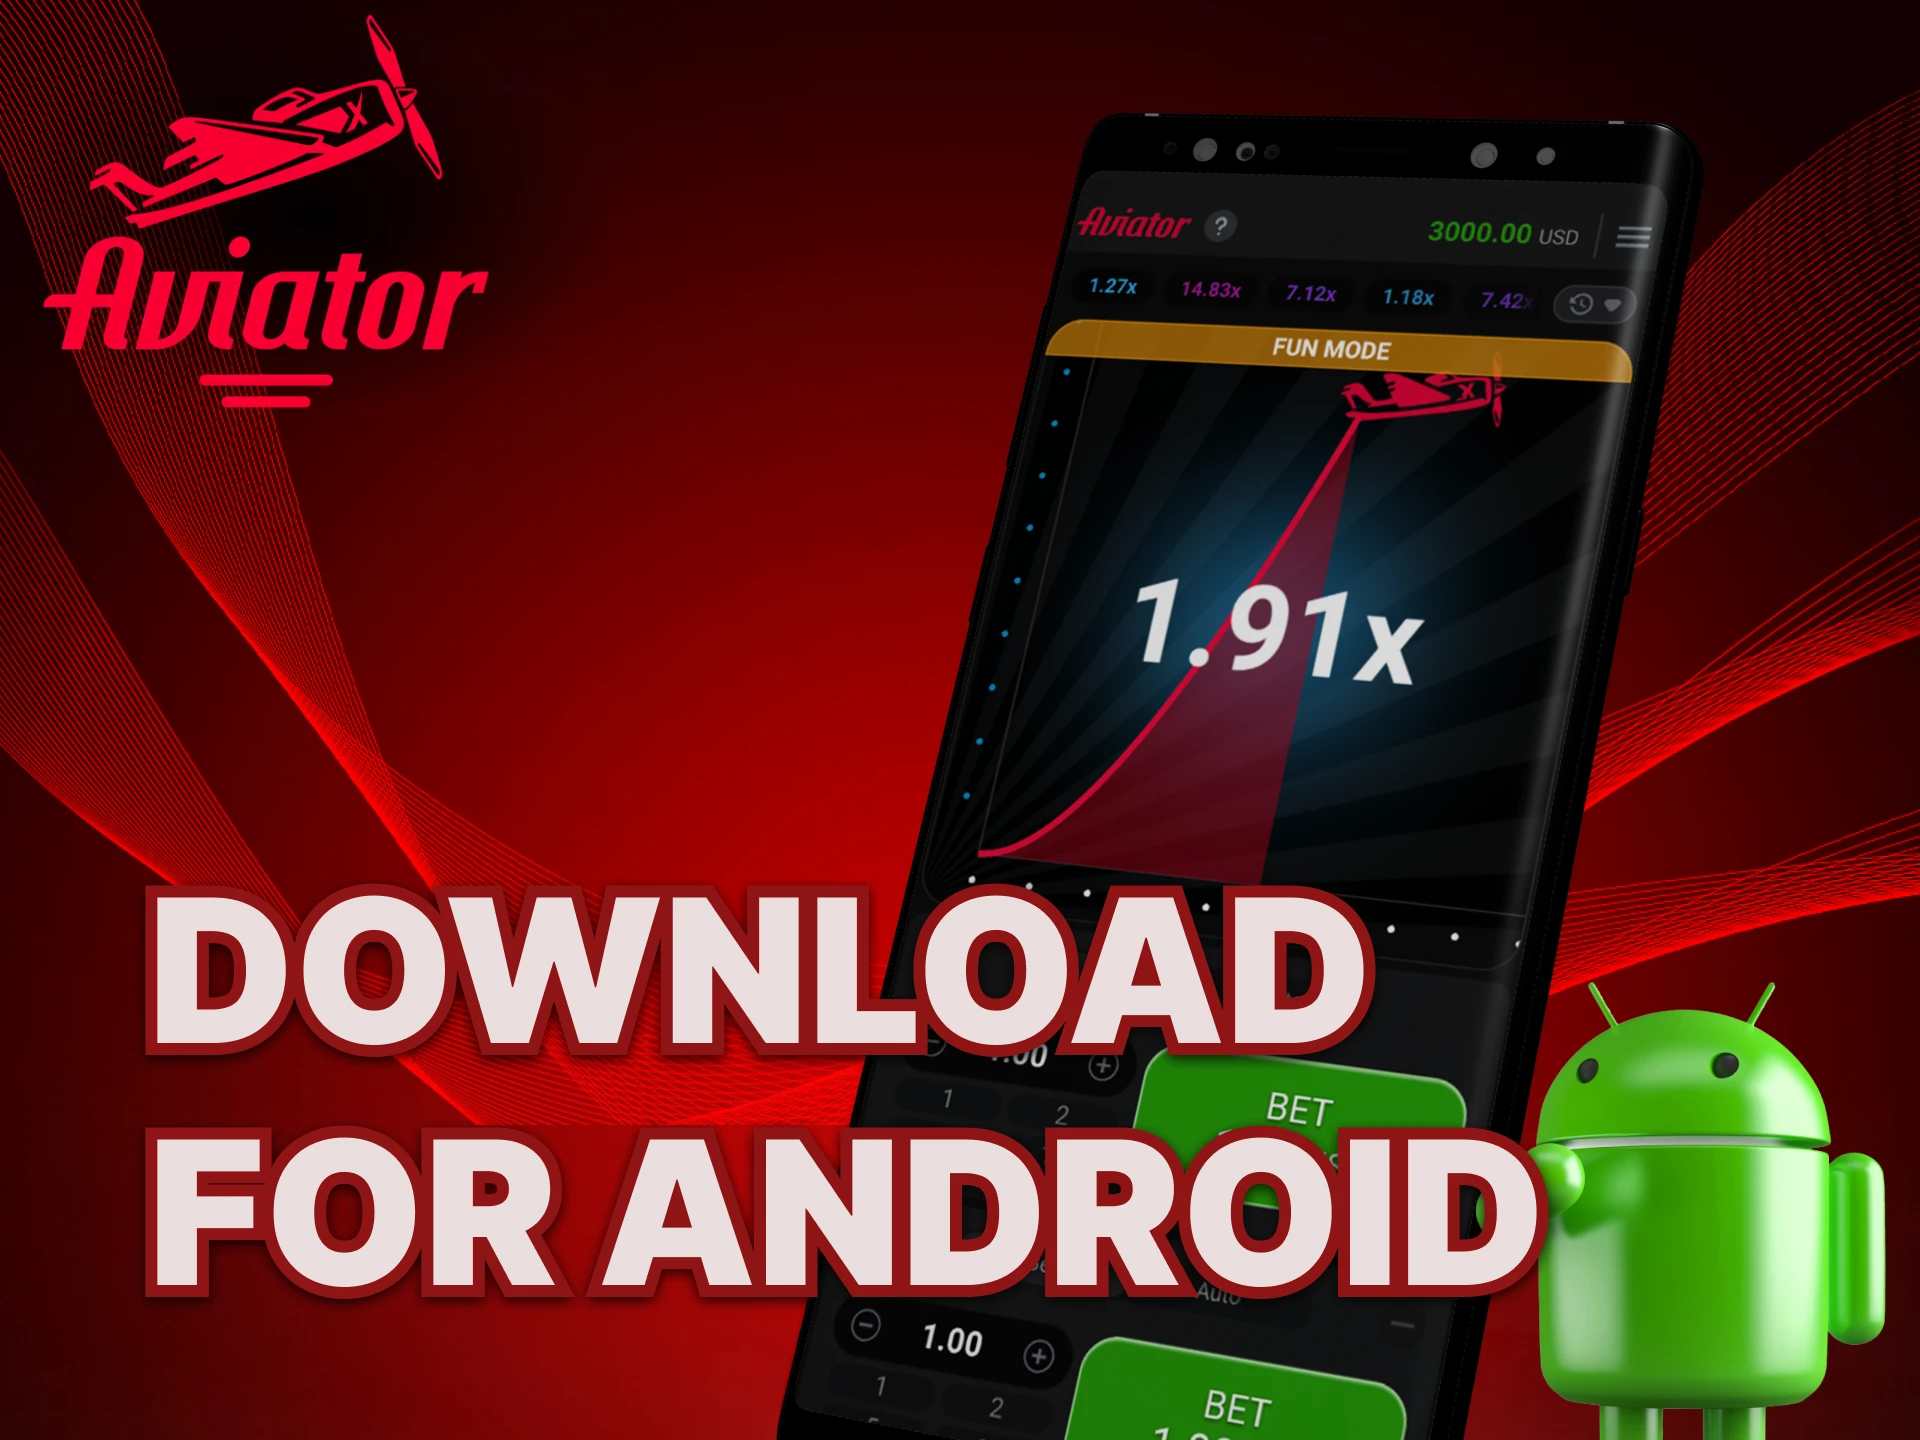 The aviator game has applications for Android phones.